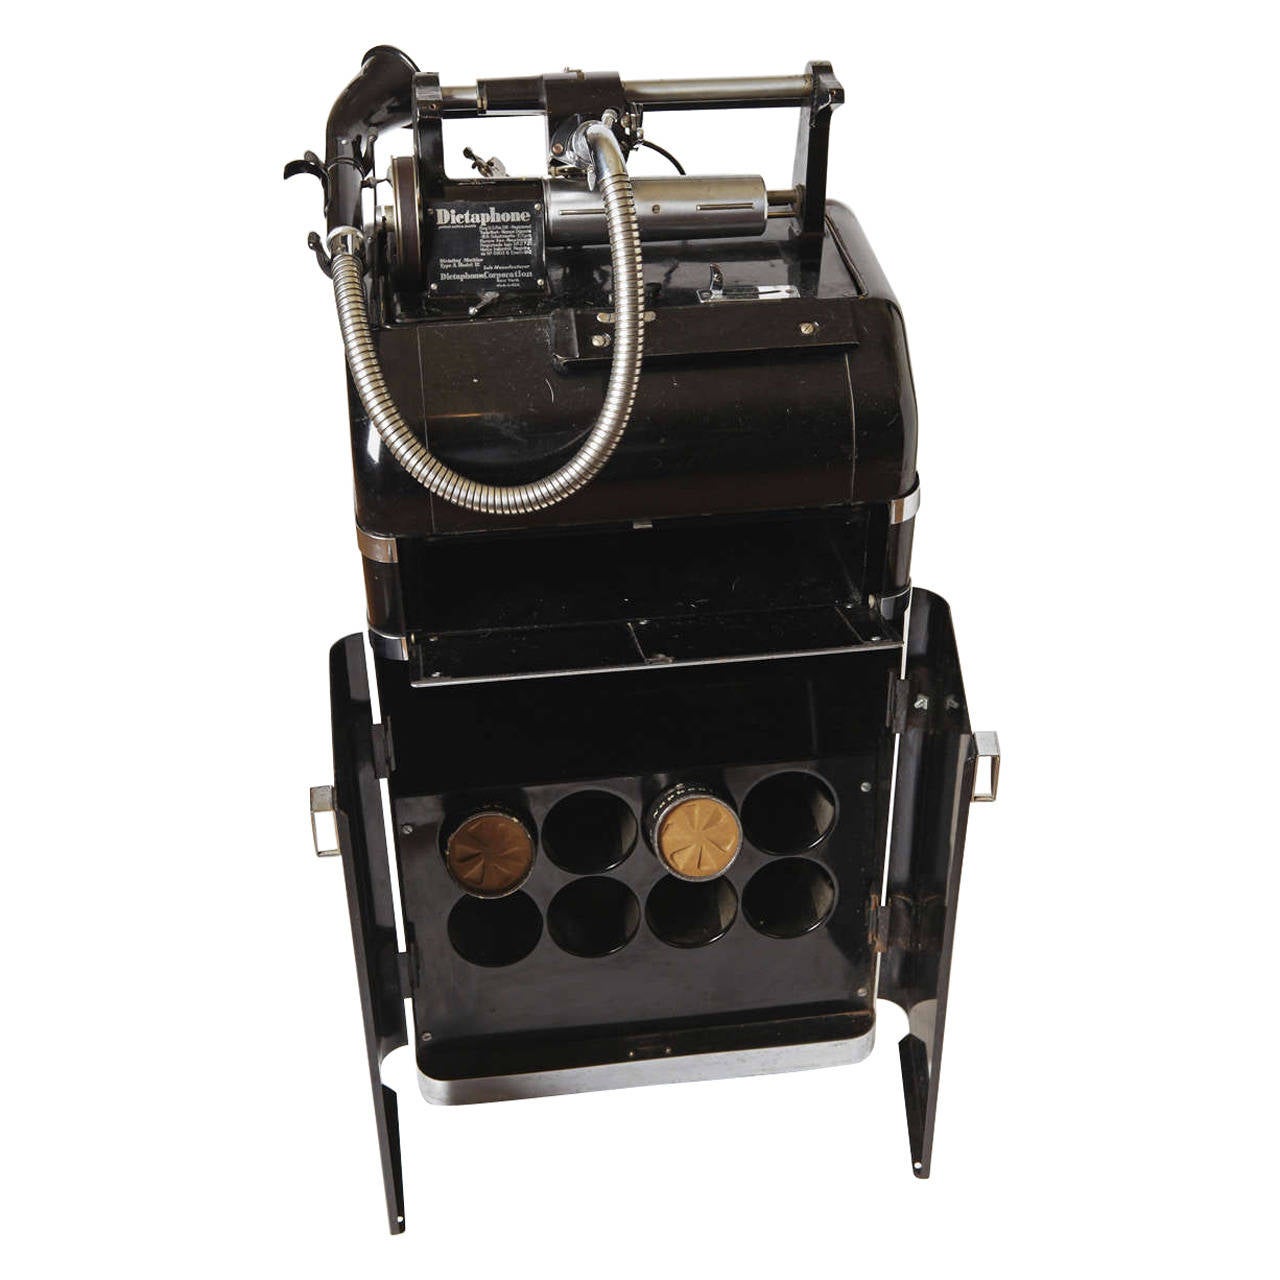 Classic black enamel and chromed-steel machine age case.<br />
Signed removable hood.<br />
Integral power cord receptacle, retains original cord.<br />
Extremely clean interior and mechanicals.<br />
Some normal wear from use to exterior, as